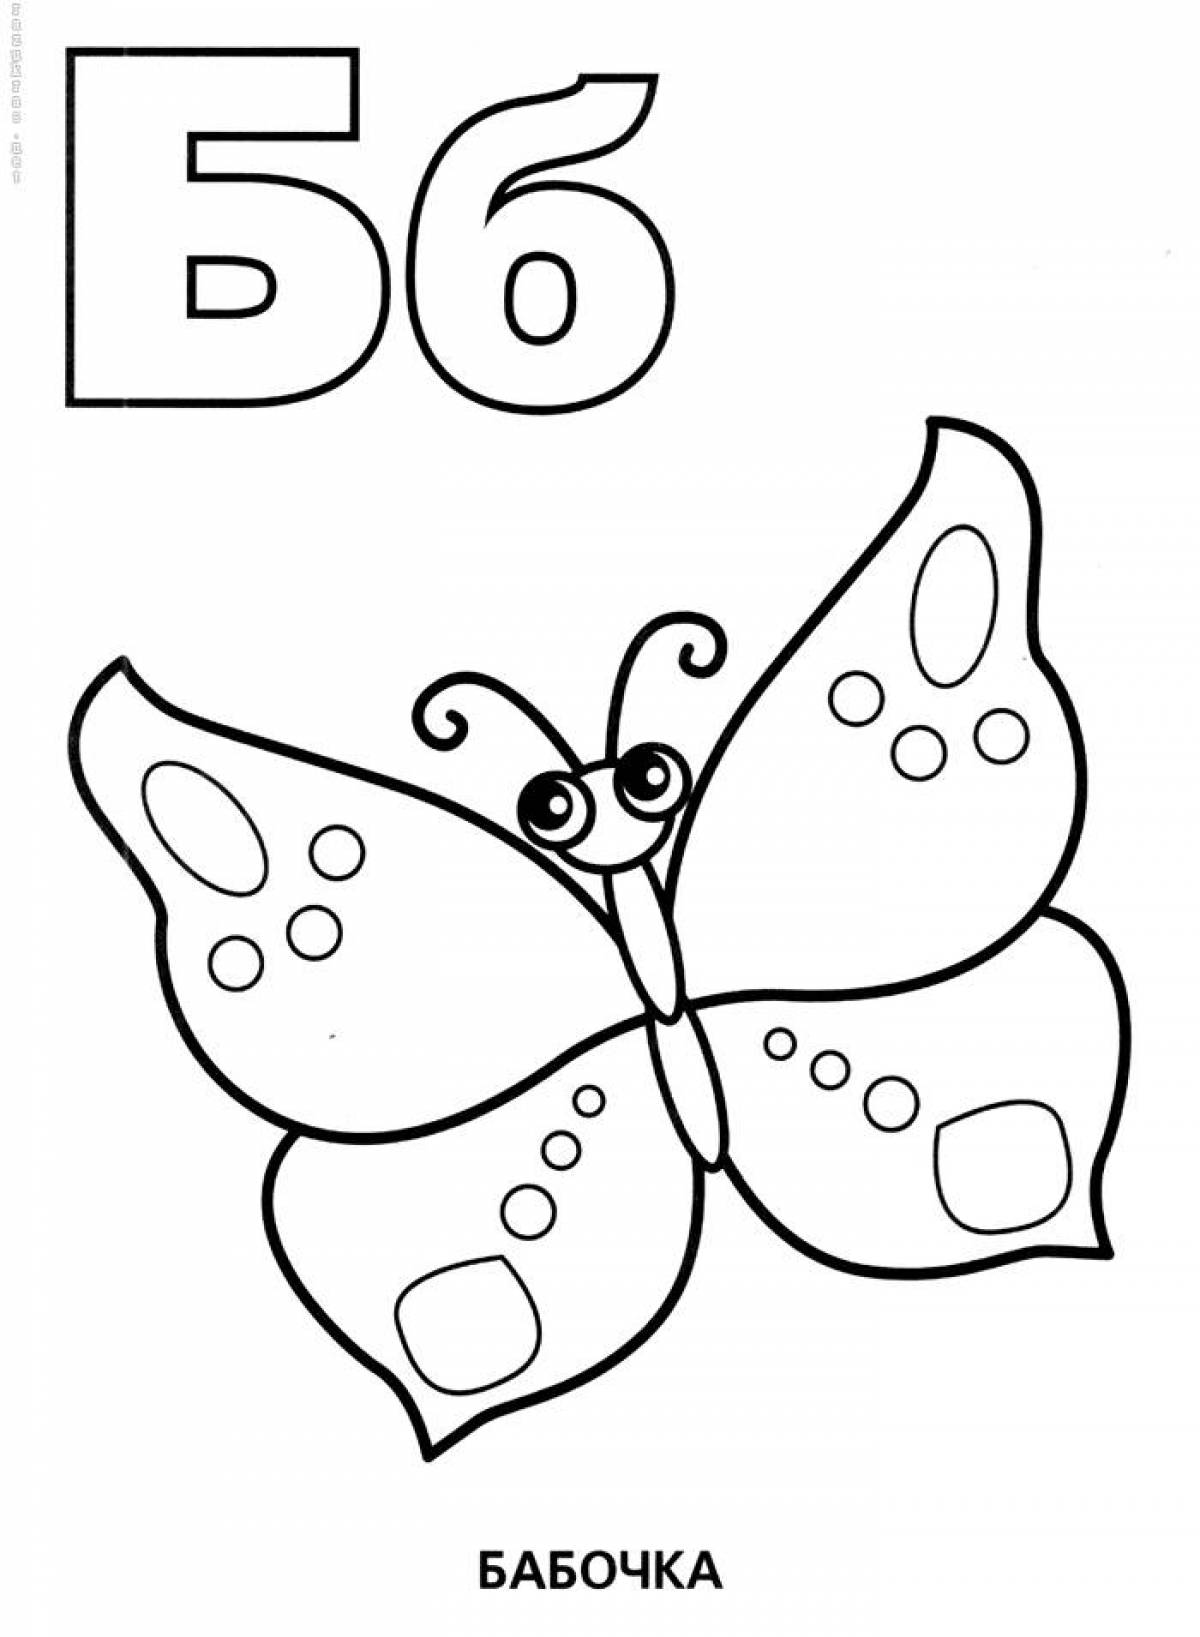 Fun letter coloring for toddlers